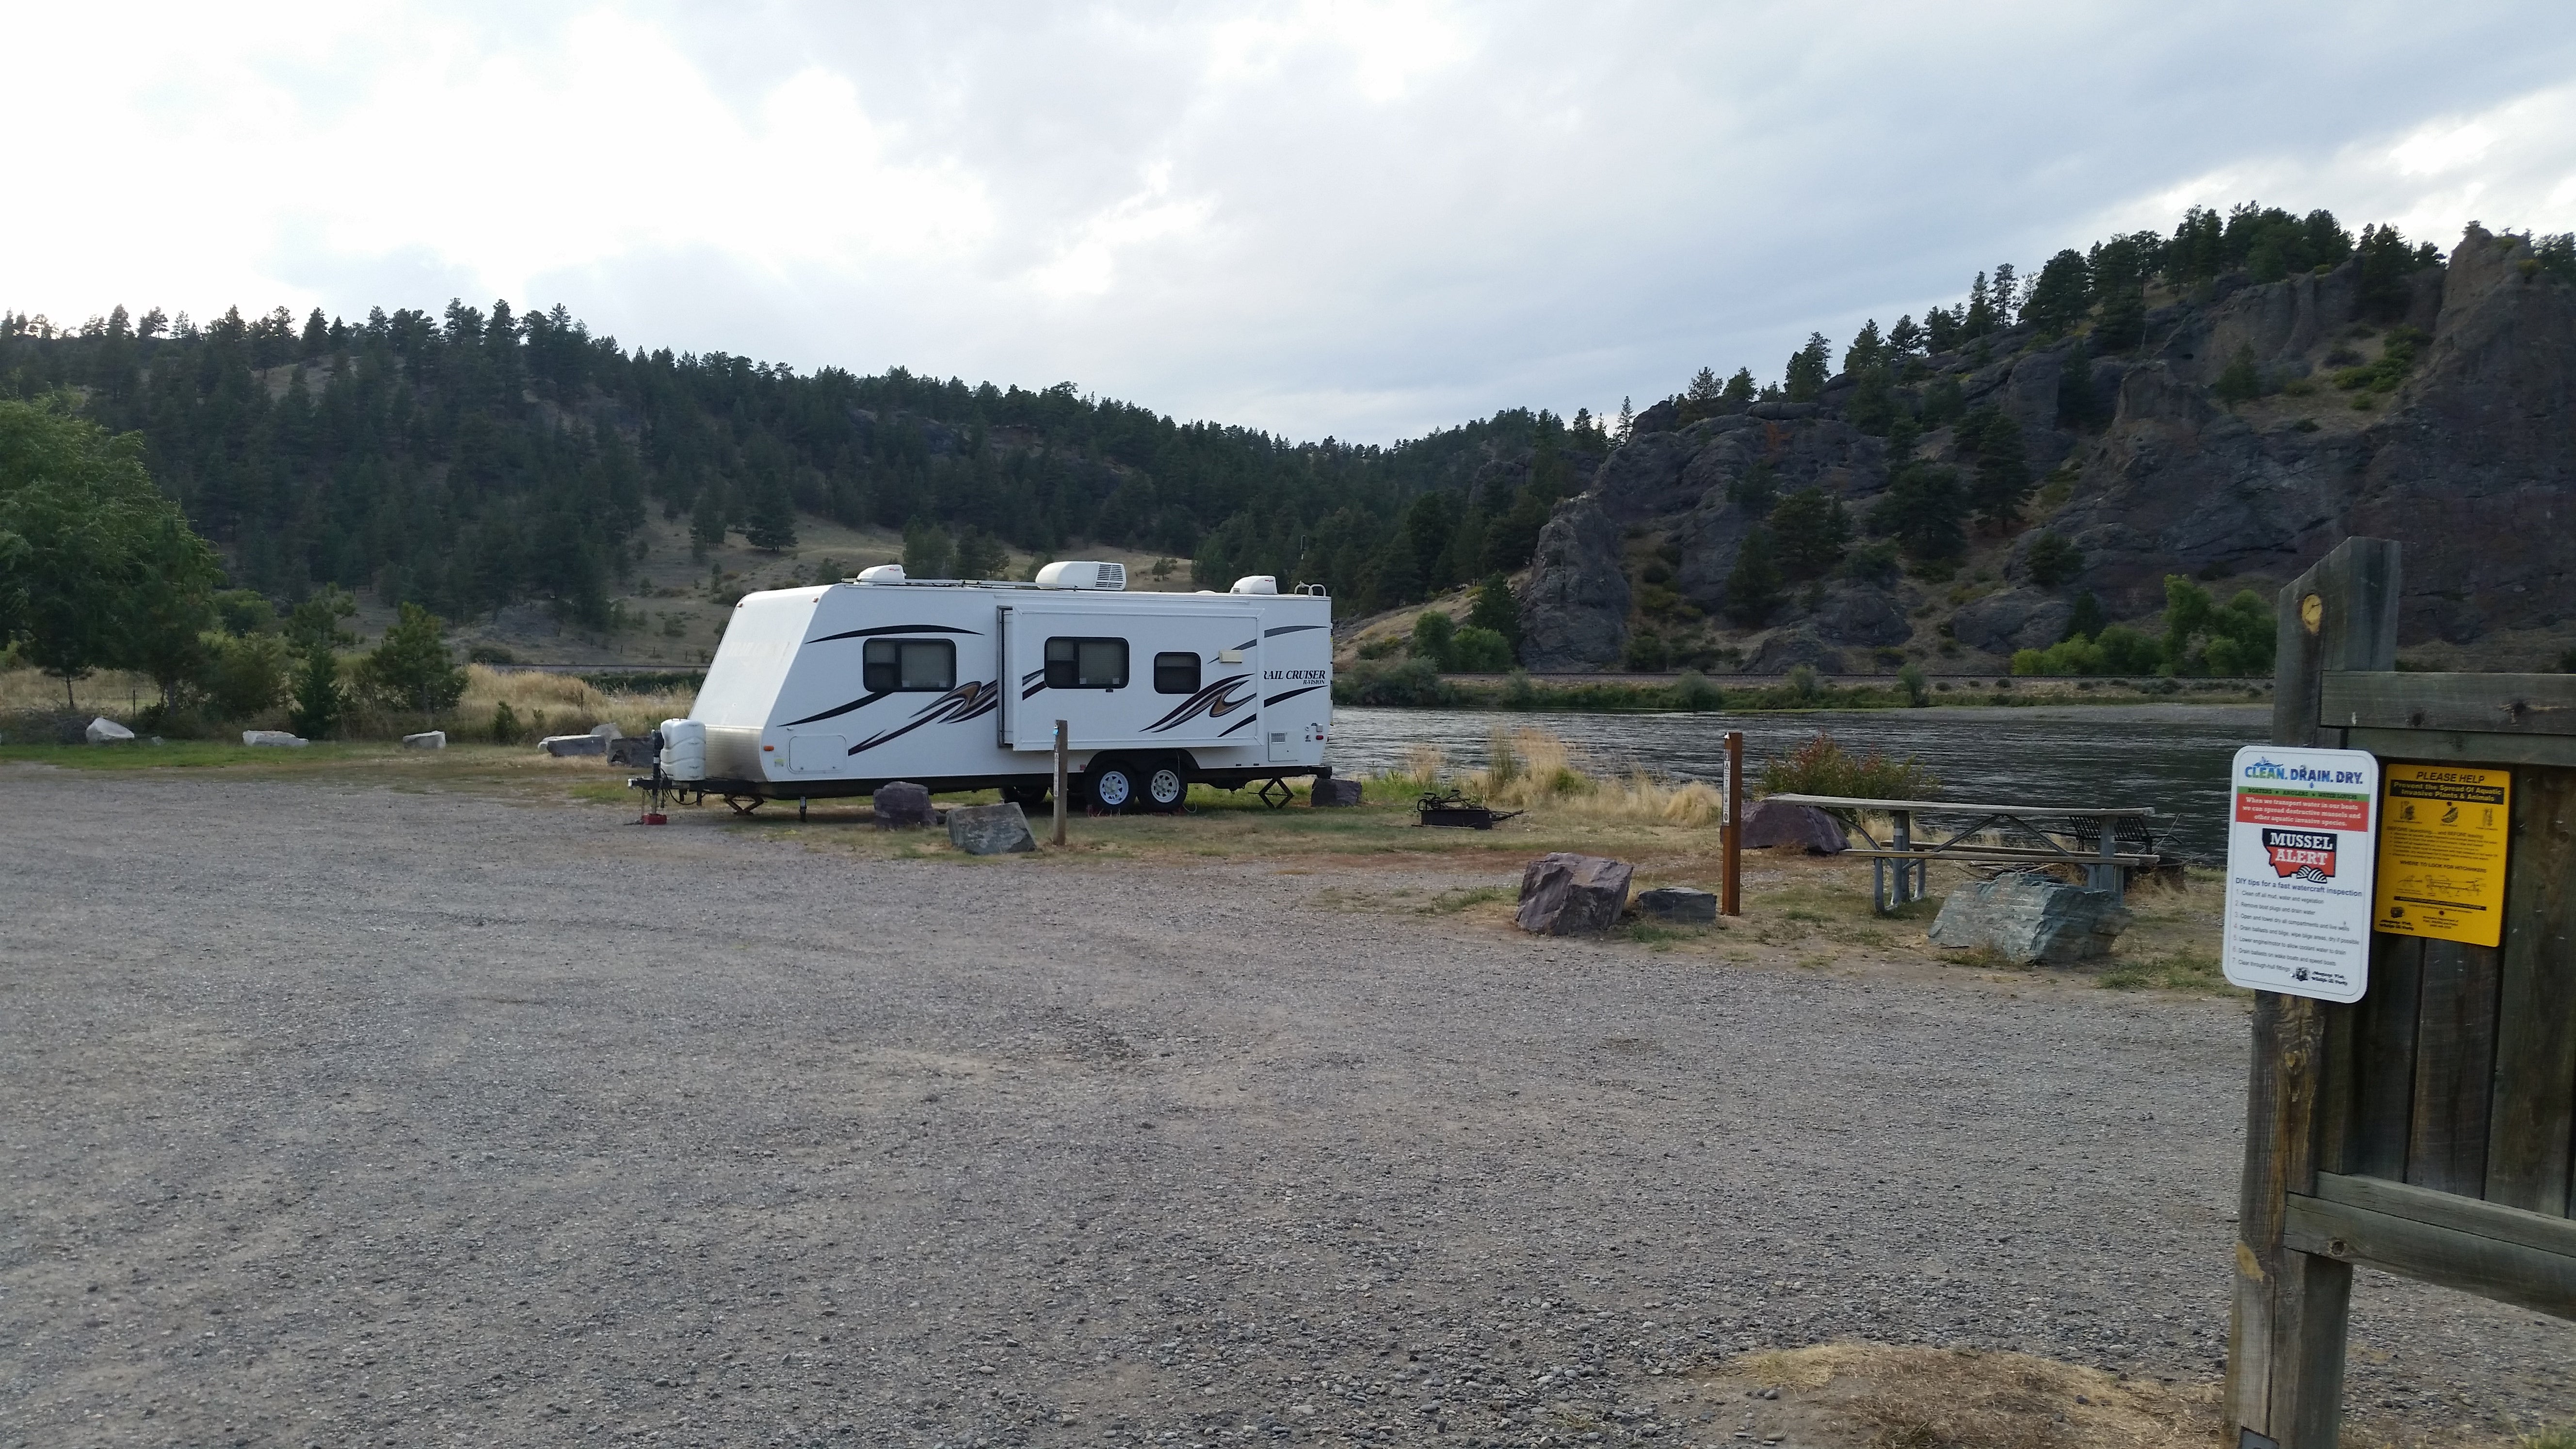 Camper submitted image from Stickney Creek Fishing Access Site - 3